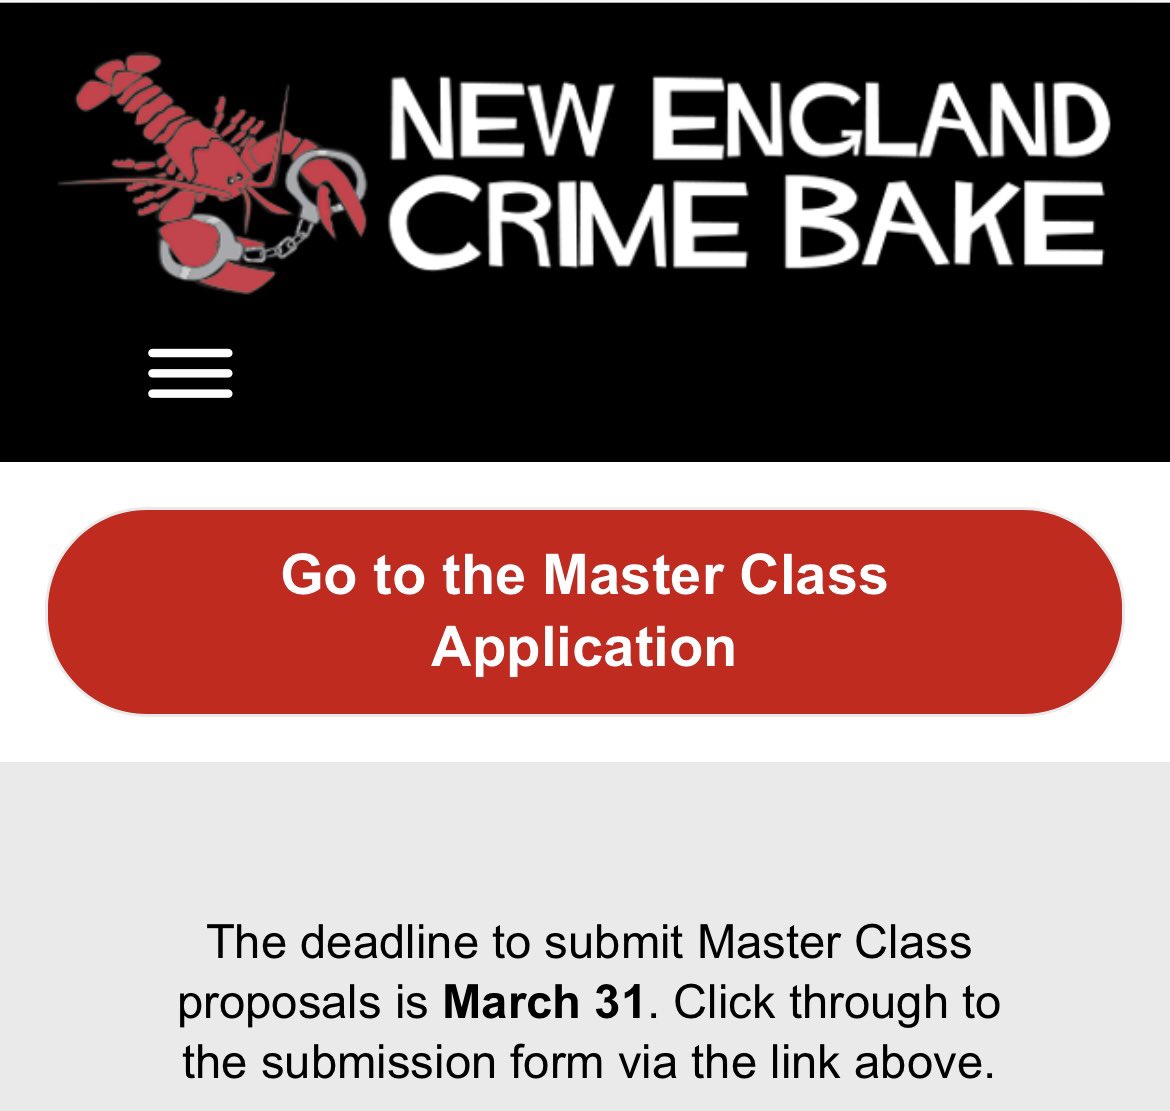 Hey writers! @necrimebake is looking for authors to teach a Master Class on Friday, November 8th. The deadline for applications is March 31st. Submit your proposal at the link: docs.google.com/forms/d/e/1FAI….